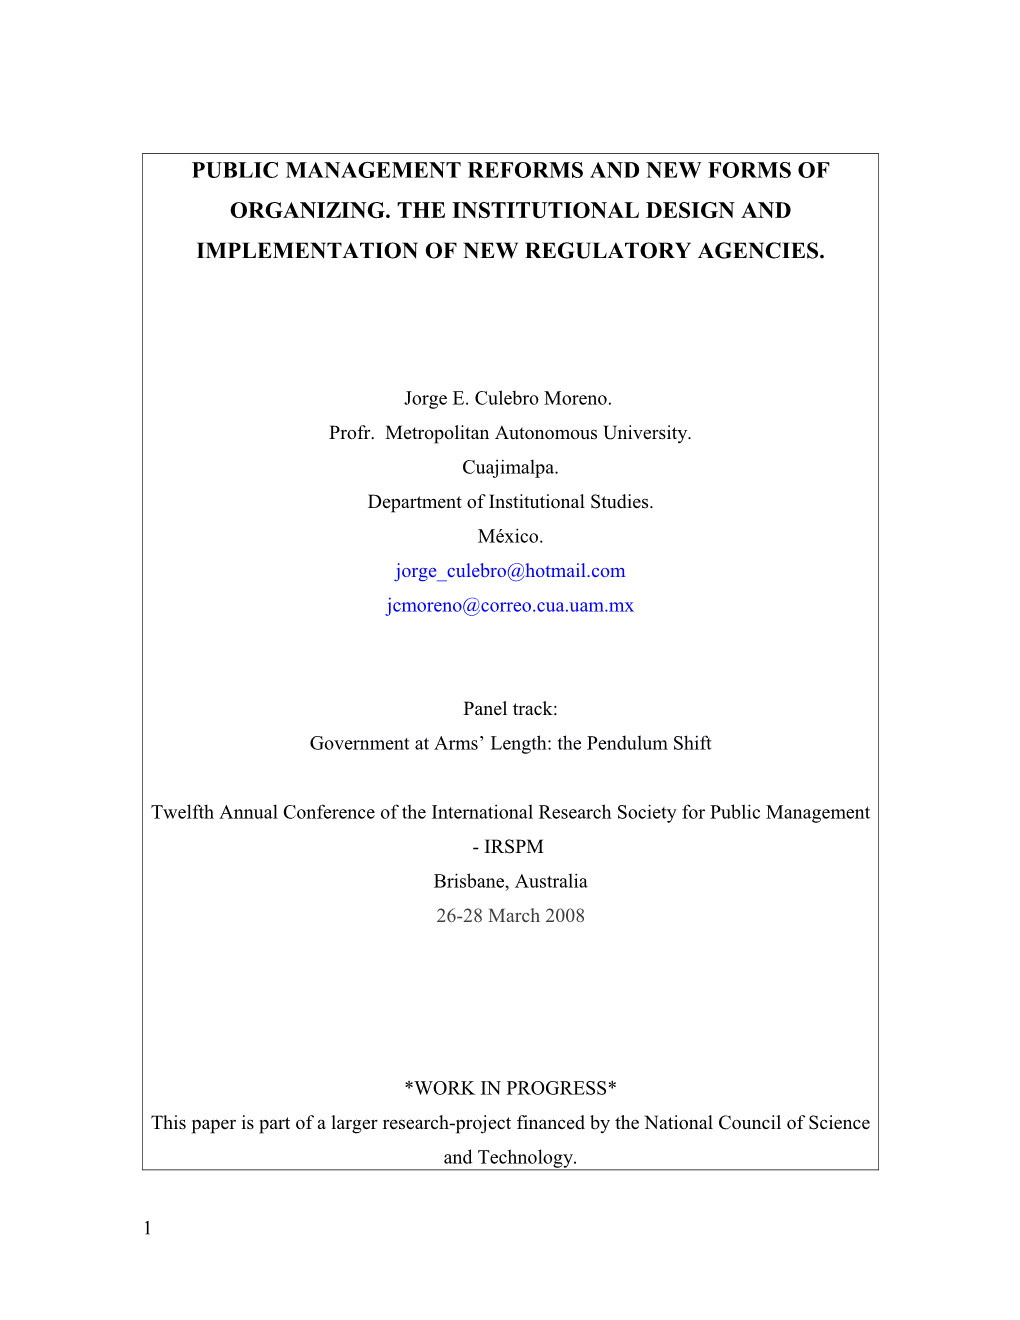 Public Management Reforms and New Forms of Organizing. the Institutional Design And